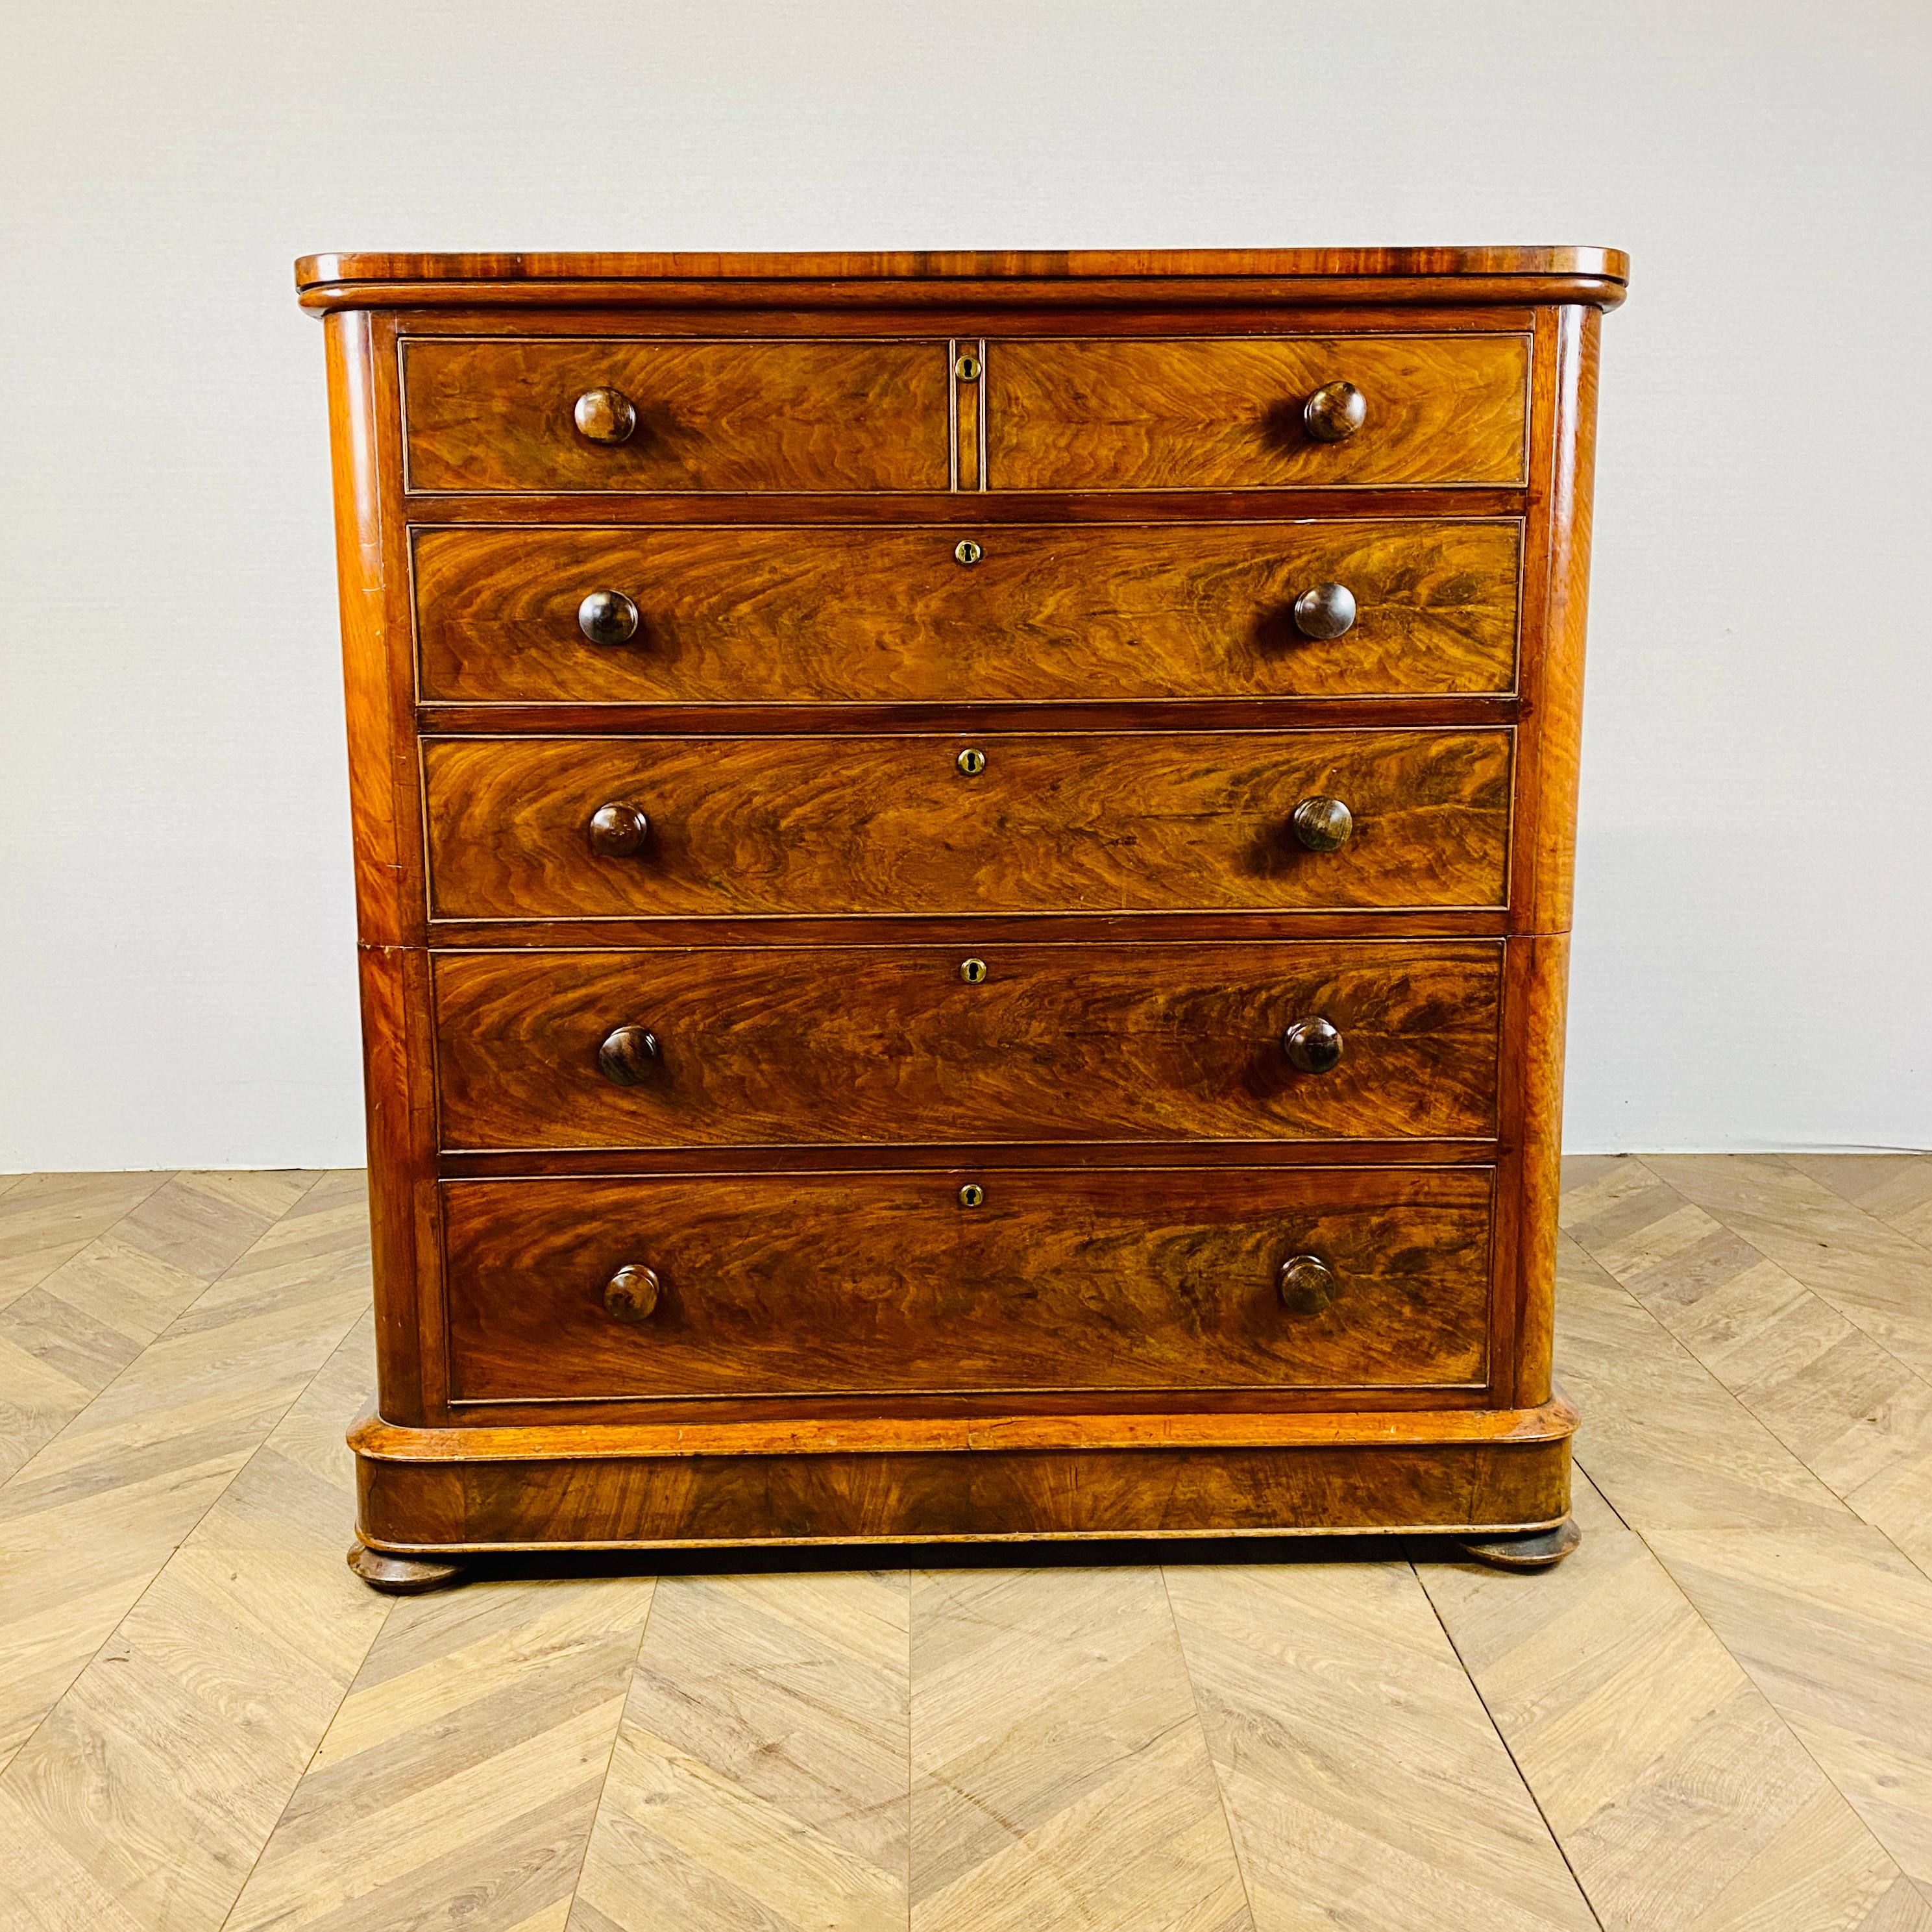 A Handsome Antique English, William IV Mahogany Veneered Chest of Drawers, 1837.

The well proportioned chest has 5 drawers and a lovely rich deep colour.

It boasts a cottage cut (come in 2 pieces) for ease of delivery.

Overall in good